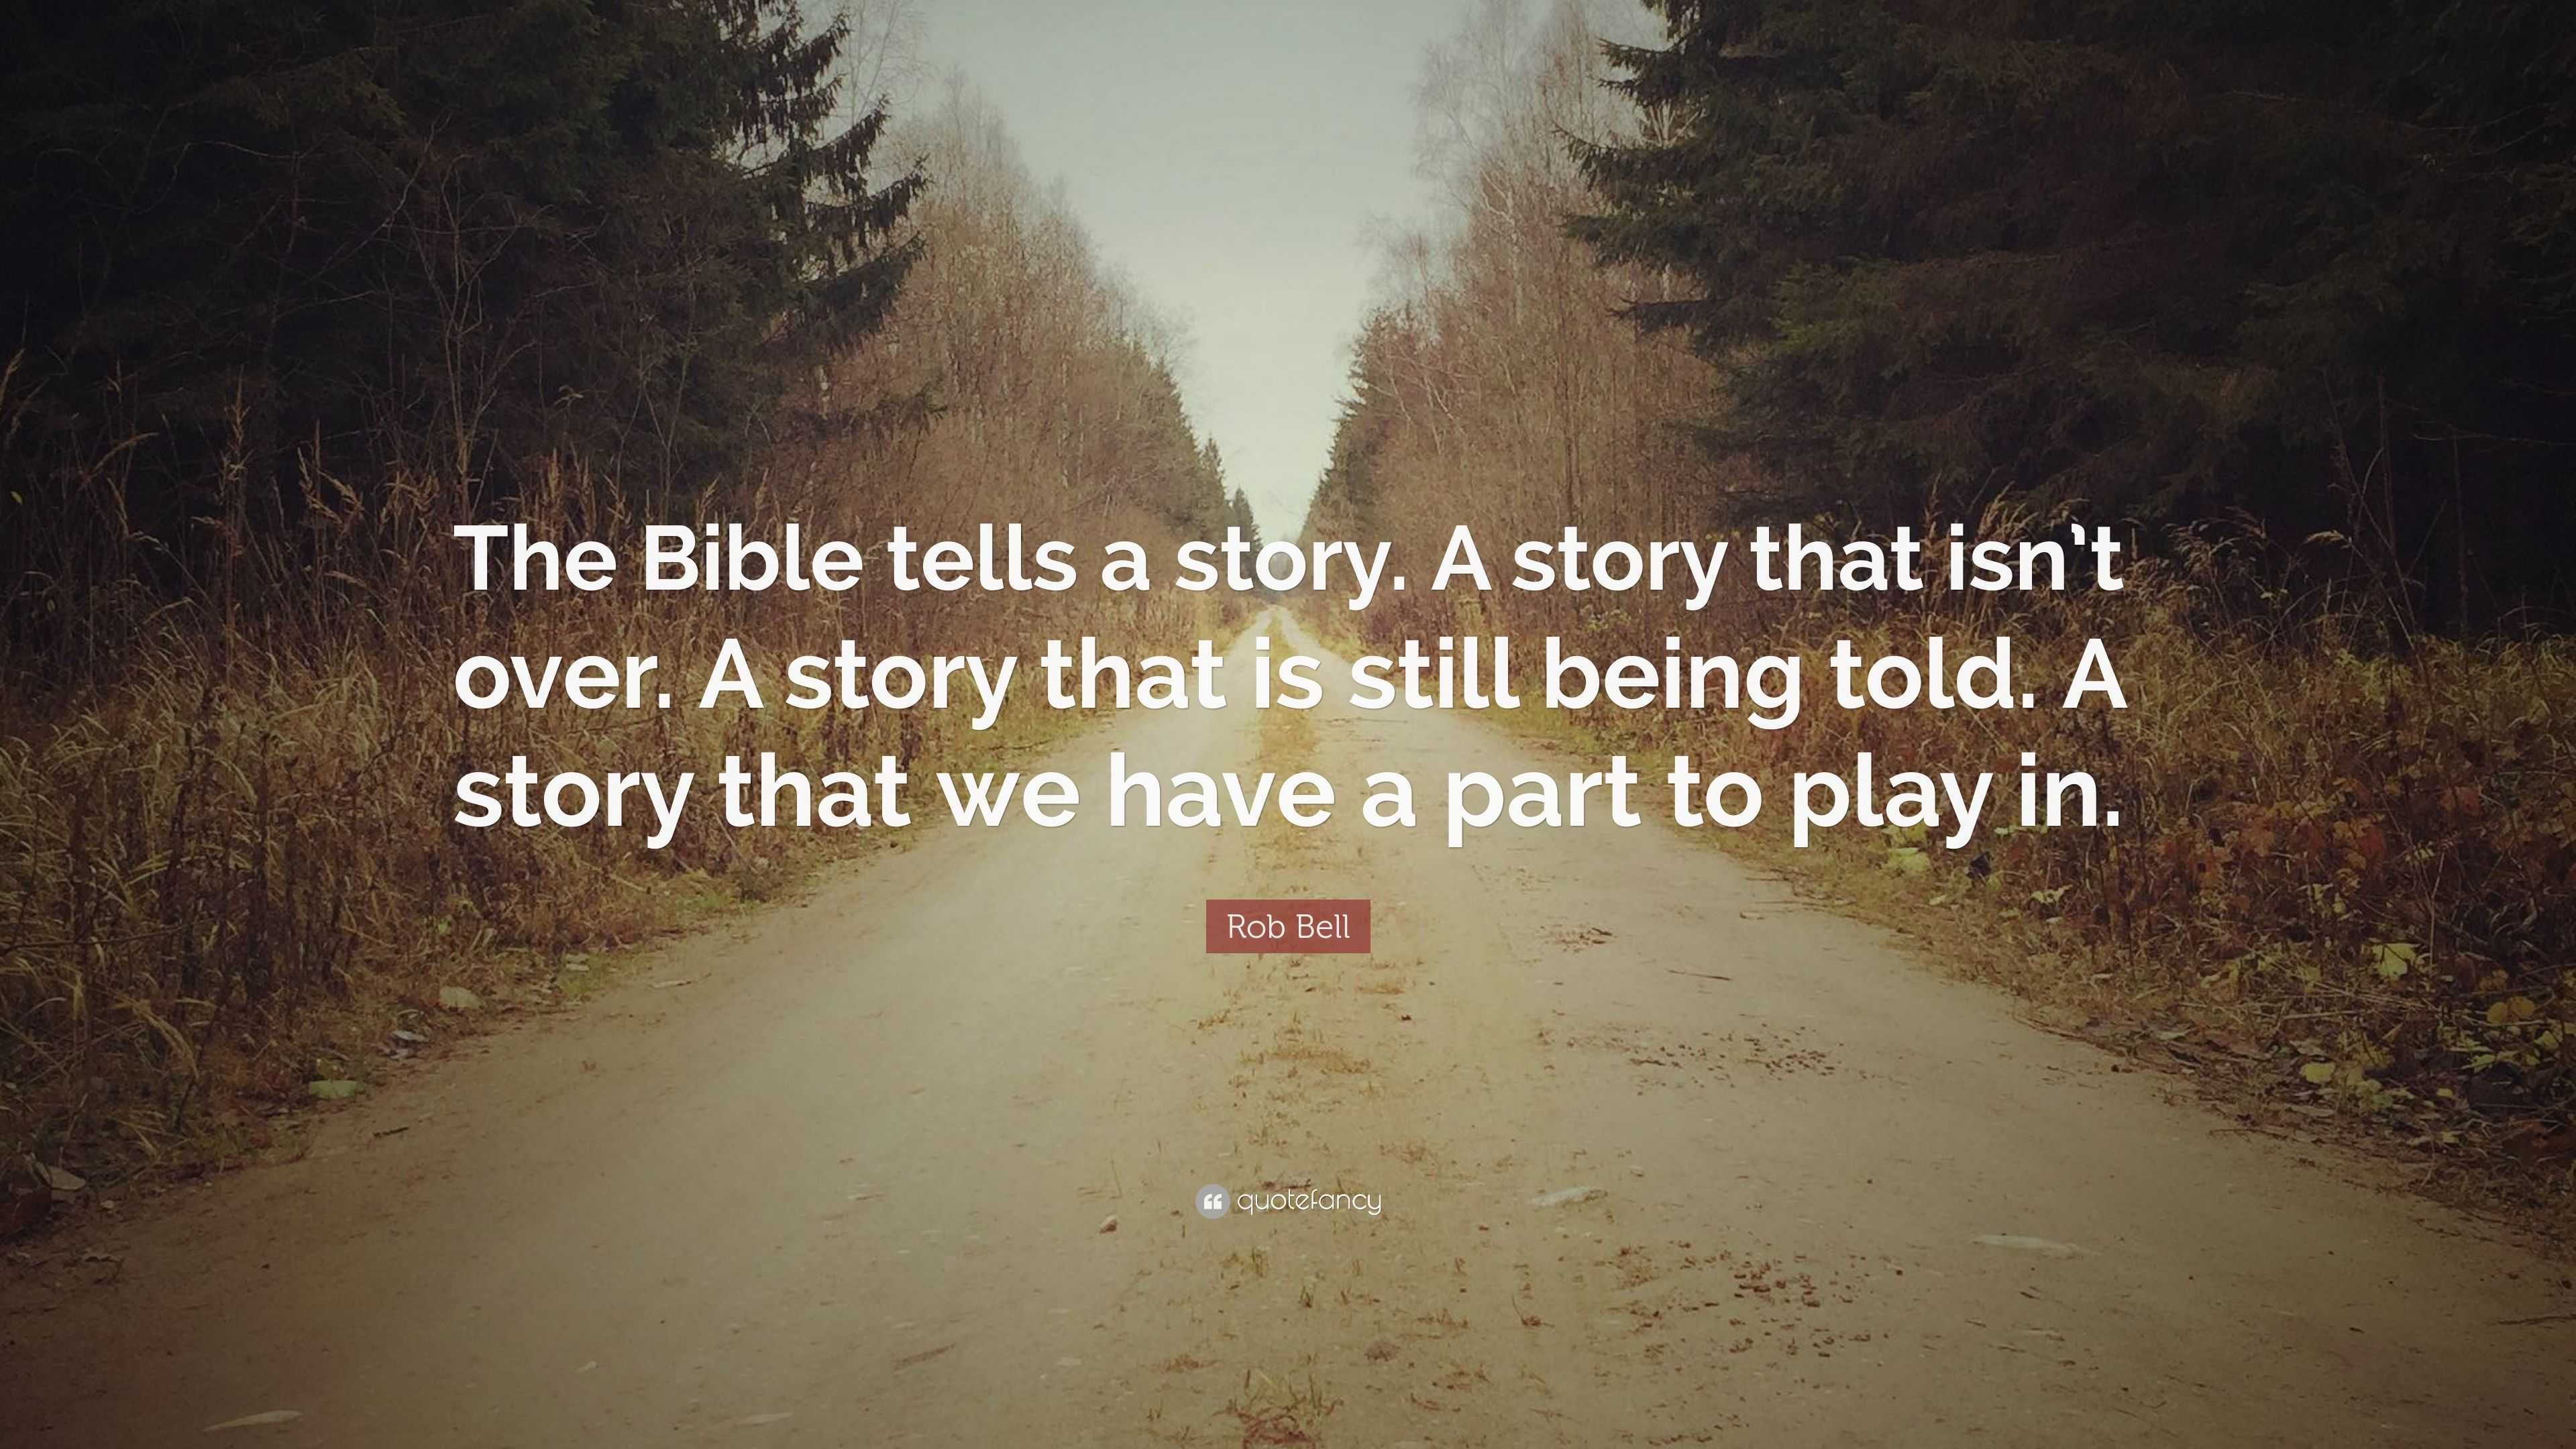 Rob Bell Quote: “The Bible tells a story. A story that isn’t over. A ...